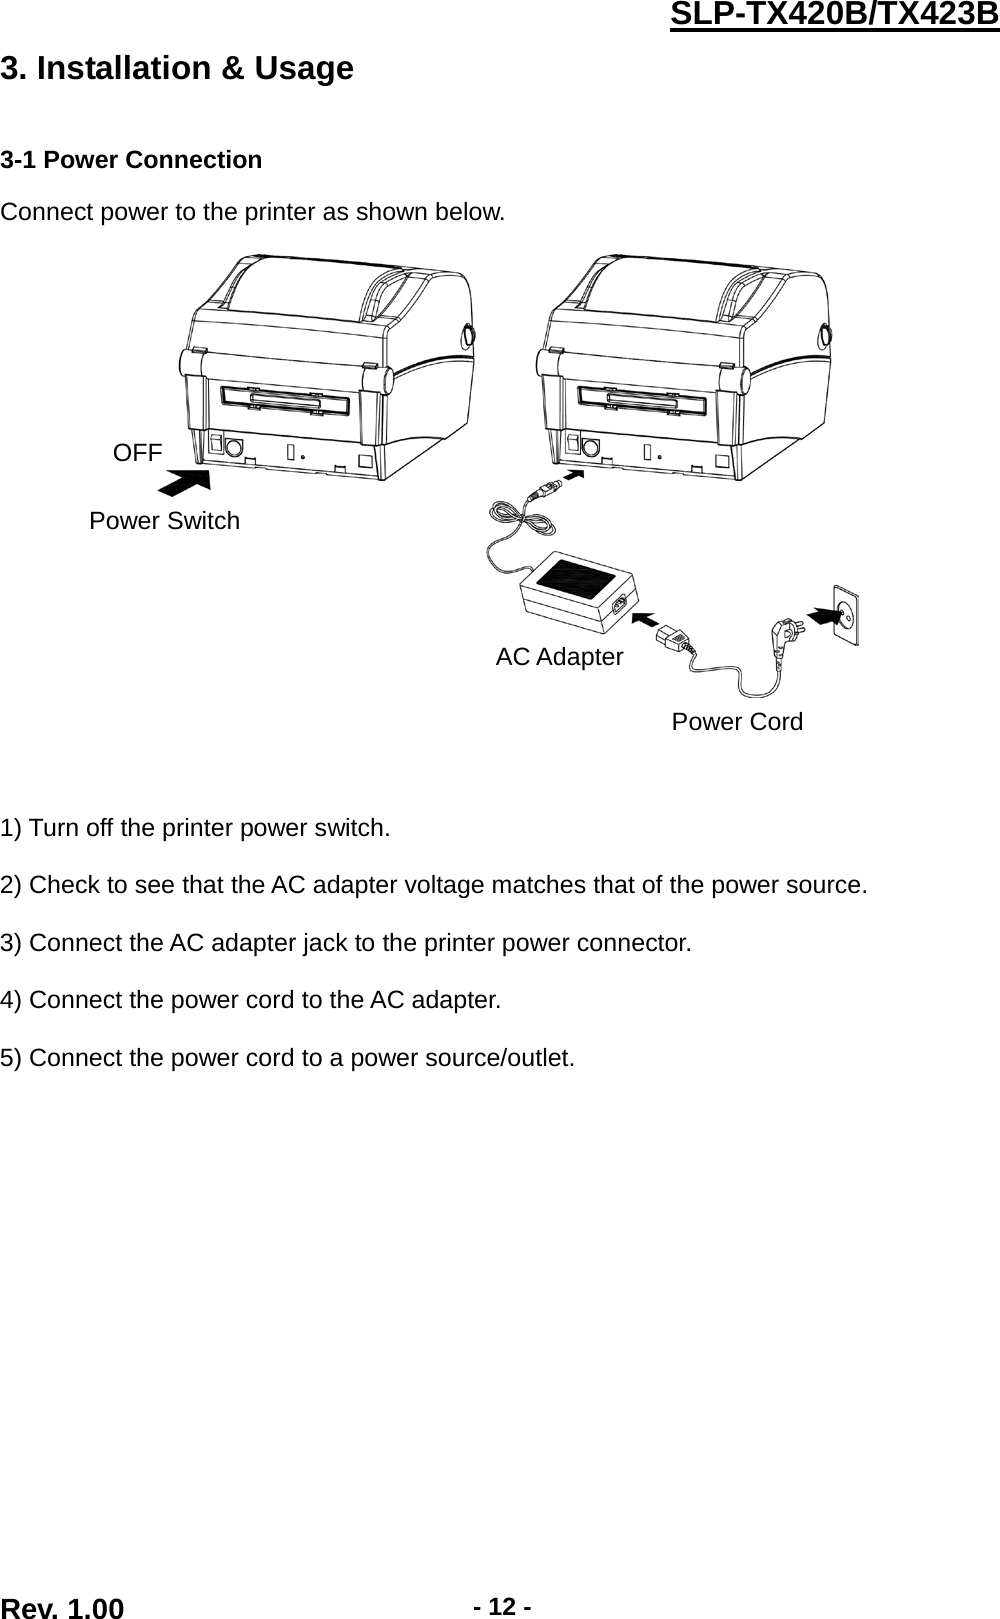  Rev. 1.00 - 12 - SLP-TX420B/TX423B 3. Installation &amp; Usage   3-1 Power Connection  Connect power to the printer as shown below.         1) Turn off the printer power switch.  2) Check to see that the AC adapter voltage matches that of the power source.  3) Connect the AC adapter jack to the printer power connector.  4) Connect the power cord to the AC adapter.  5) Connect the power cord to a power source/outlet. OFF Power Switch Power Cord AC Adapter 